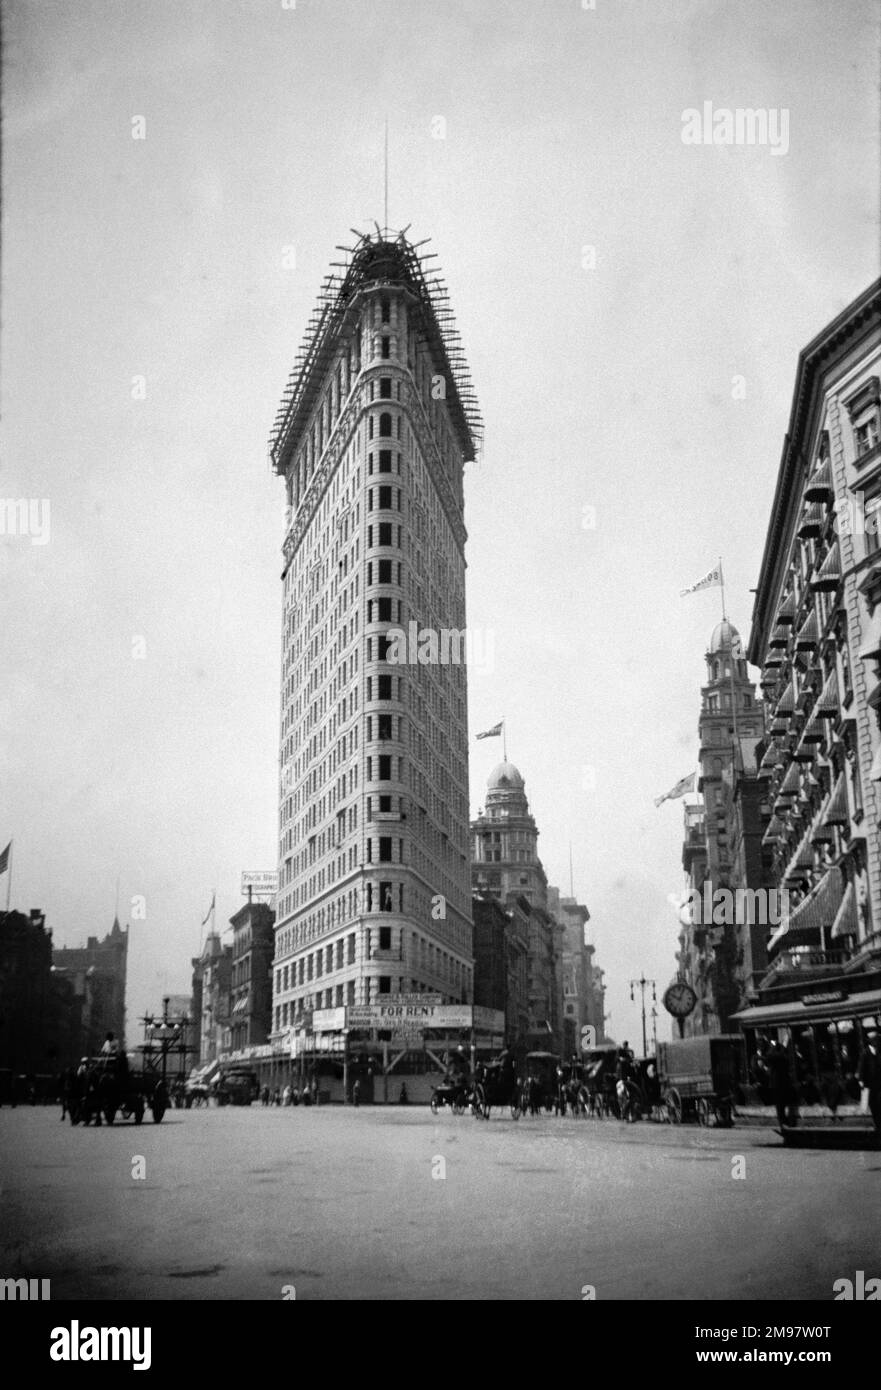 Flatiron building in its year of completion. Originaly named The Fuller building upon it completion in 1902. Now widely known as the Flatiron building due to its resemblance to a cast iron cloths iron. The building became a designated New York land mark in 1966, later in 1989 a national historic land mark. Stock Photo